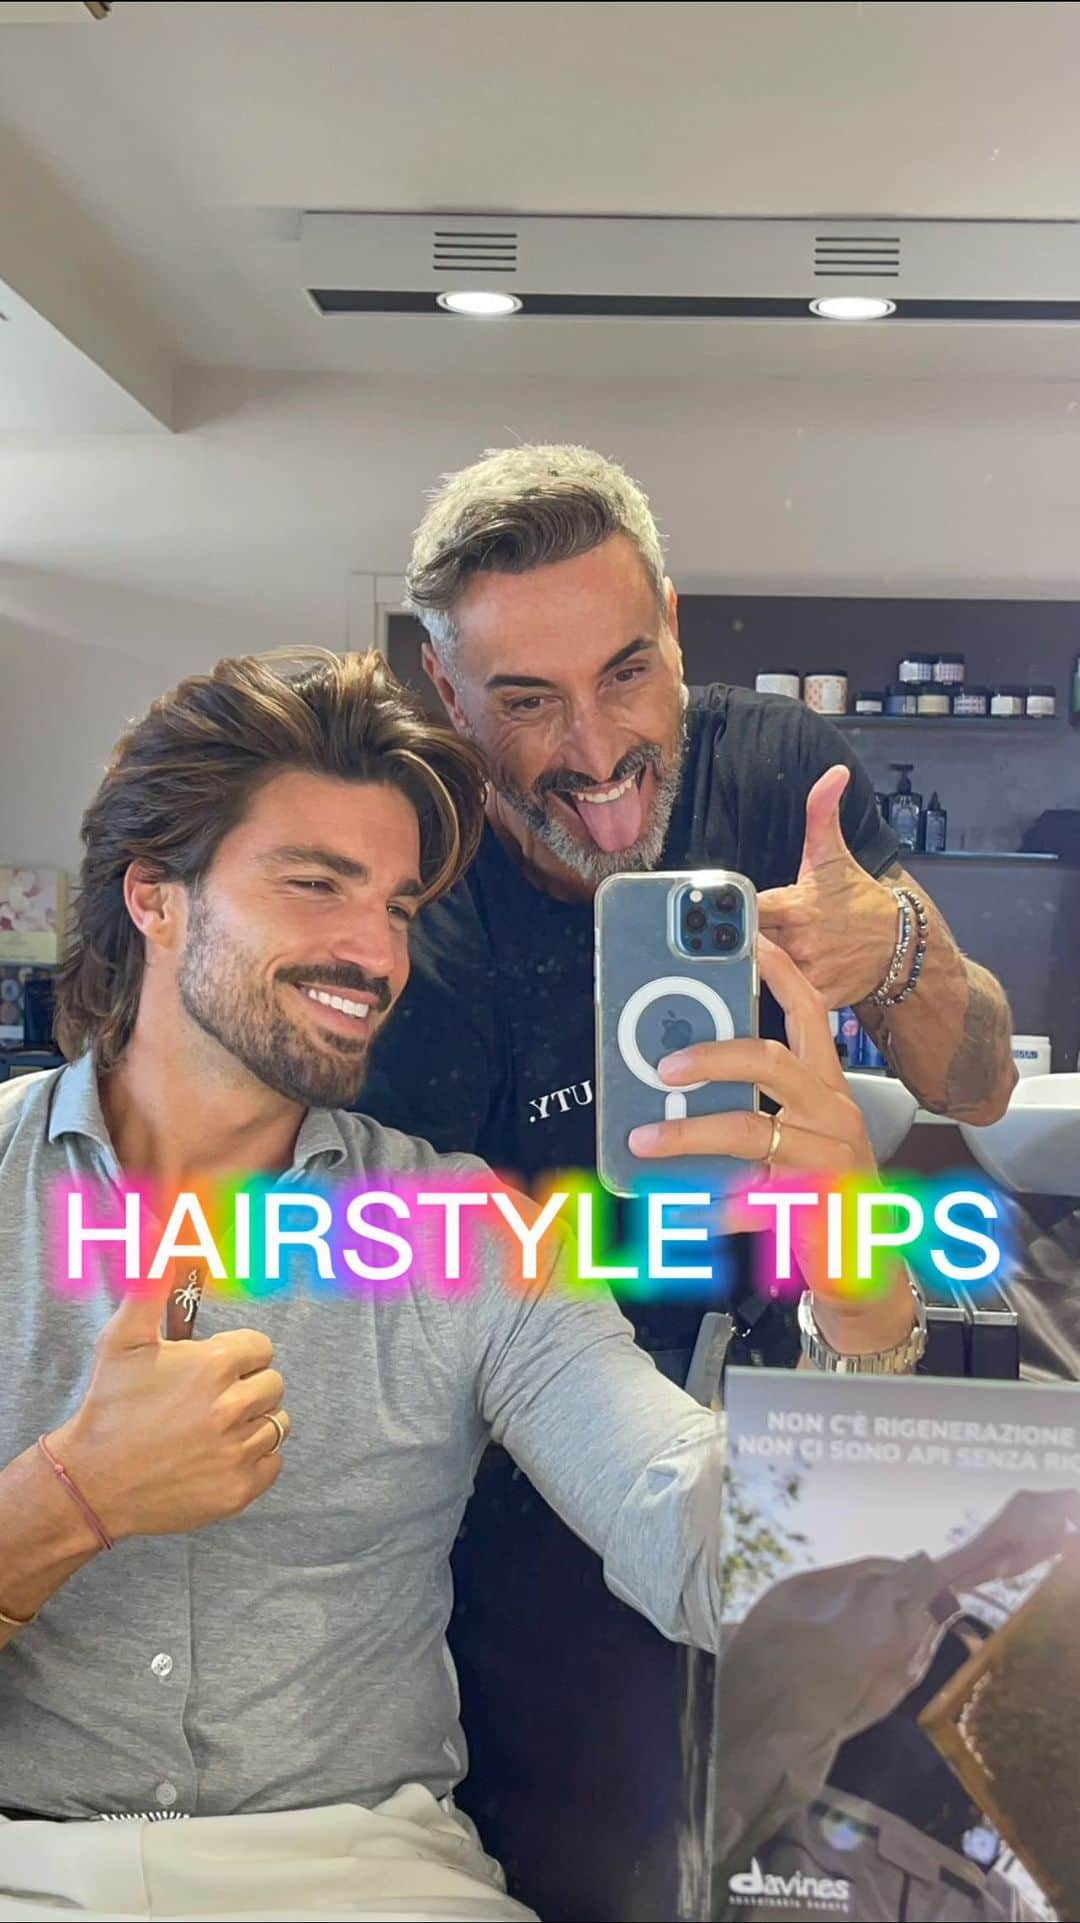 Mariano Di Vaioのインスタグラム：「💈 After all this years making YouTube videos,  shootings, video commercials, coloring and cutting and styling any kind of hairstyle I can easily say I noticed couple of things that really made a big difference on my hair health, and consequentially on its brightness and scalp smoothness too.  I’ll make a list not for importance:  1 - Shampoo your hair just 2/3 times a week.  I’m my opinion the least you’re able to wash your hair with shampoo the better it is.  You’d say: “if I put clay and wax everyday that’s impossible” well If use the right healty products for styling like the @hair_bello ones I use that’s possible.    2 - let them breathe • I’ll say the obvious for someone here, but me that I’m forced to put a lot of products when I shoot movies or photos or magazines, often times with hairstylist that fo everything they have to make your hair look a certain way without really caring at the damages, I try to stay for a few days without products, with a clean scalp and maybe put a little bit of oil to give them strength.  3 - wear hats more. Well I always thought hats are not good for your hair, they don’t let them breathe your scalp suffers and so on.. that’s not really true, it’s a fashion item that suits many styles and if you don’t wear it EVERYDAY is definitely a big help to improve your hair health by keeping them clean.  4 - salty water. We’ll have you noticed how good the scalp and hair is when you’re on the beach, well salty waters does the magic, so next time you go to the beach and head home don’t rush in the shower, maybe wash the hair but with just water and leave some salt for a day on your scalp and hair you’ll see how good it gets.  More tips coming soon  Share it with a friend that cares 😎✌🏽  Peace & love  MDV」